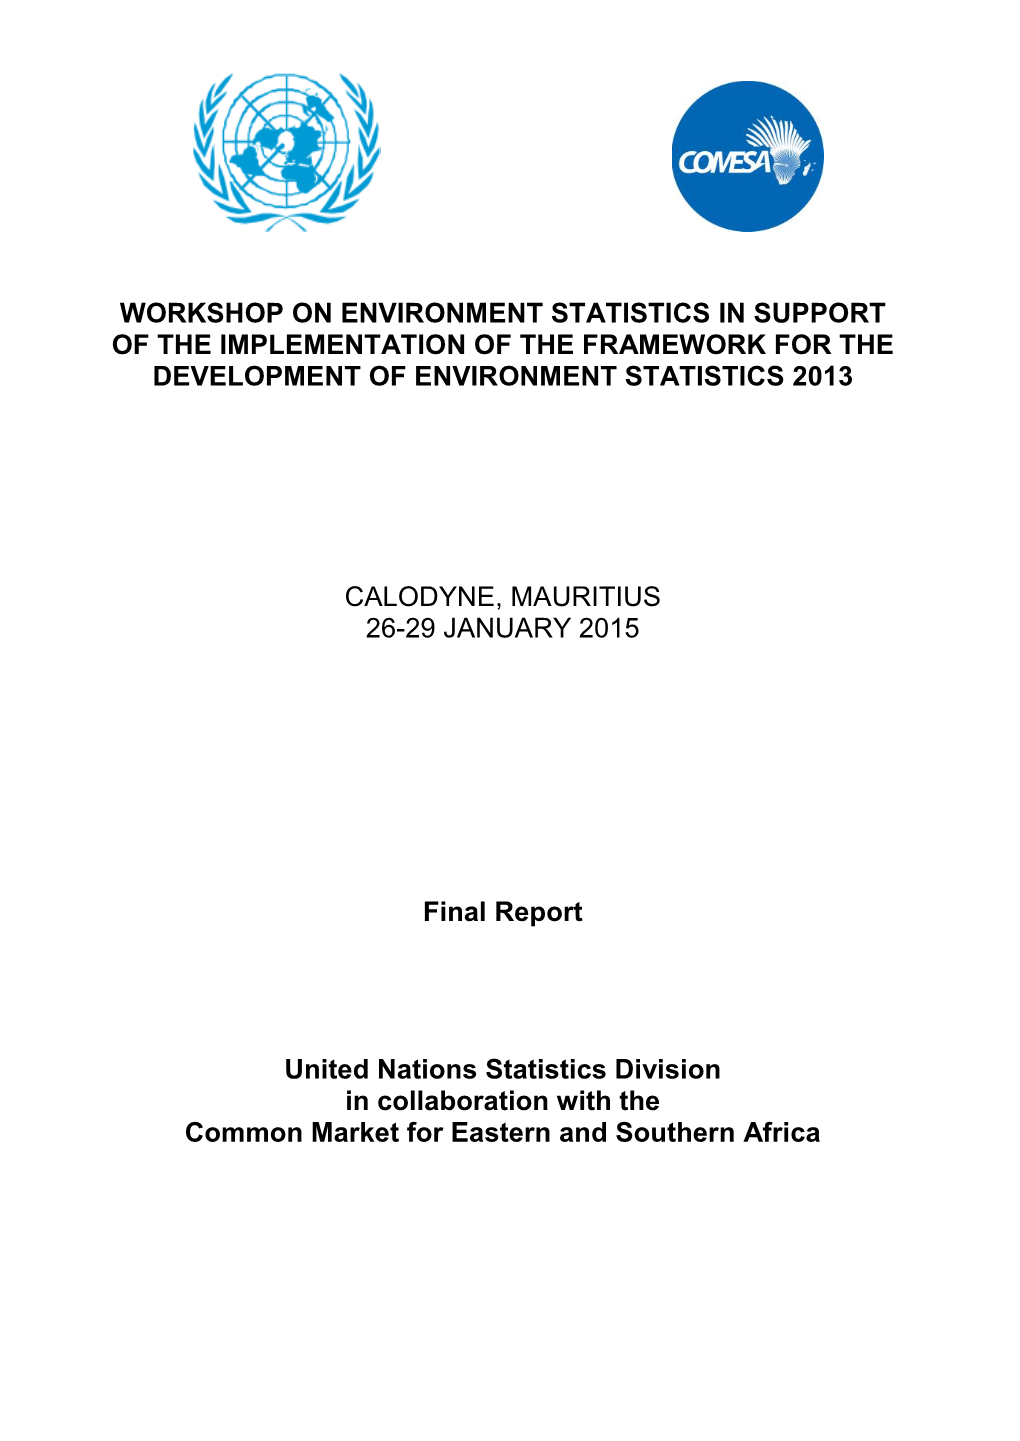 Workshop on Environment Statistics in Support of the Implementation of the Framework for the Development of Environment Statistics 2013